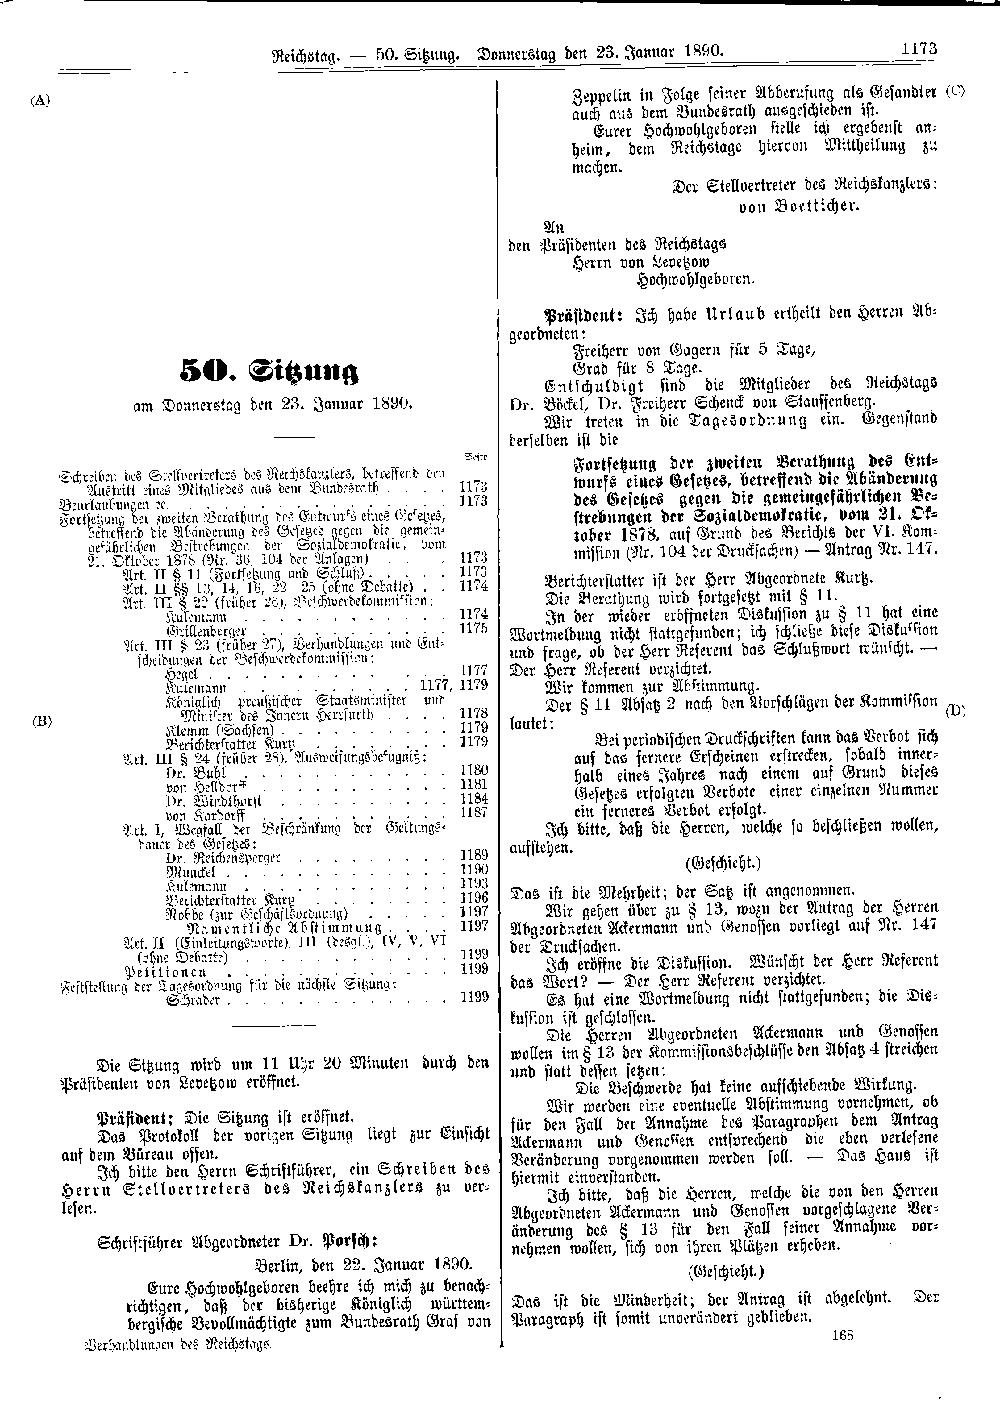 Scan of page DXLVIII